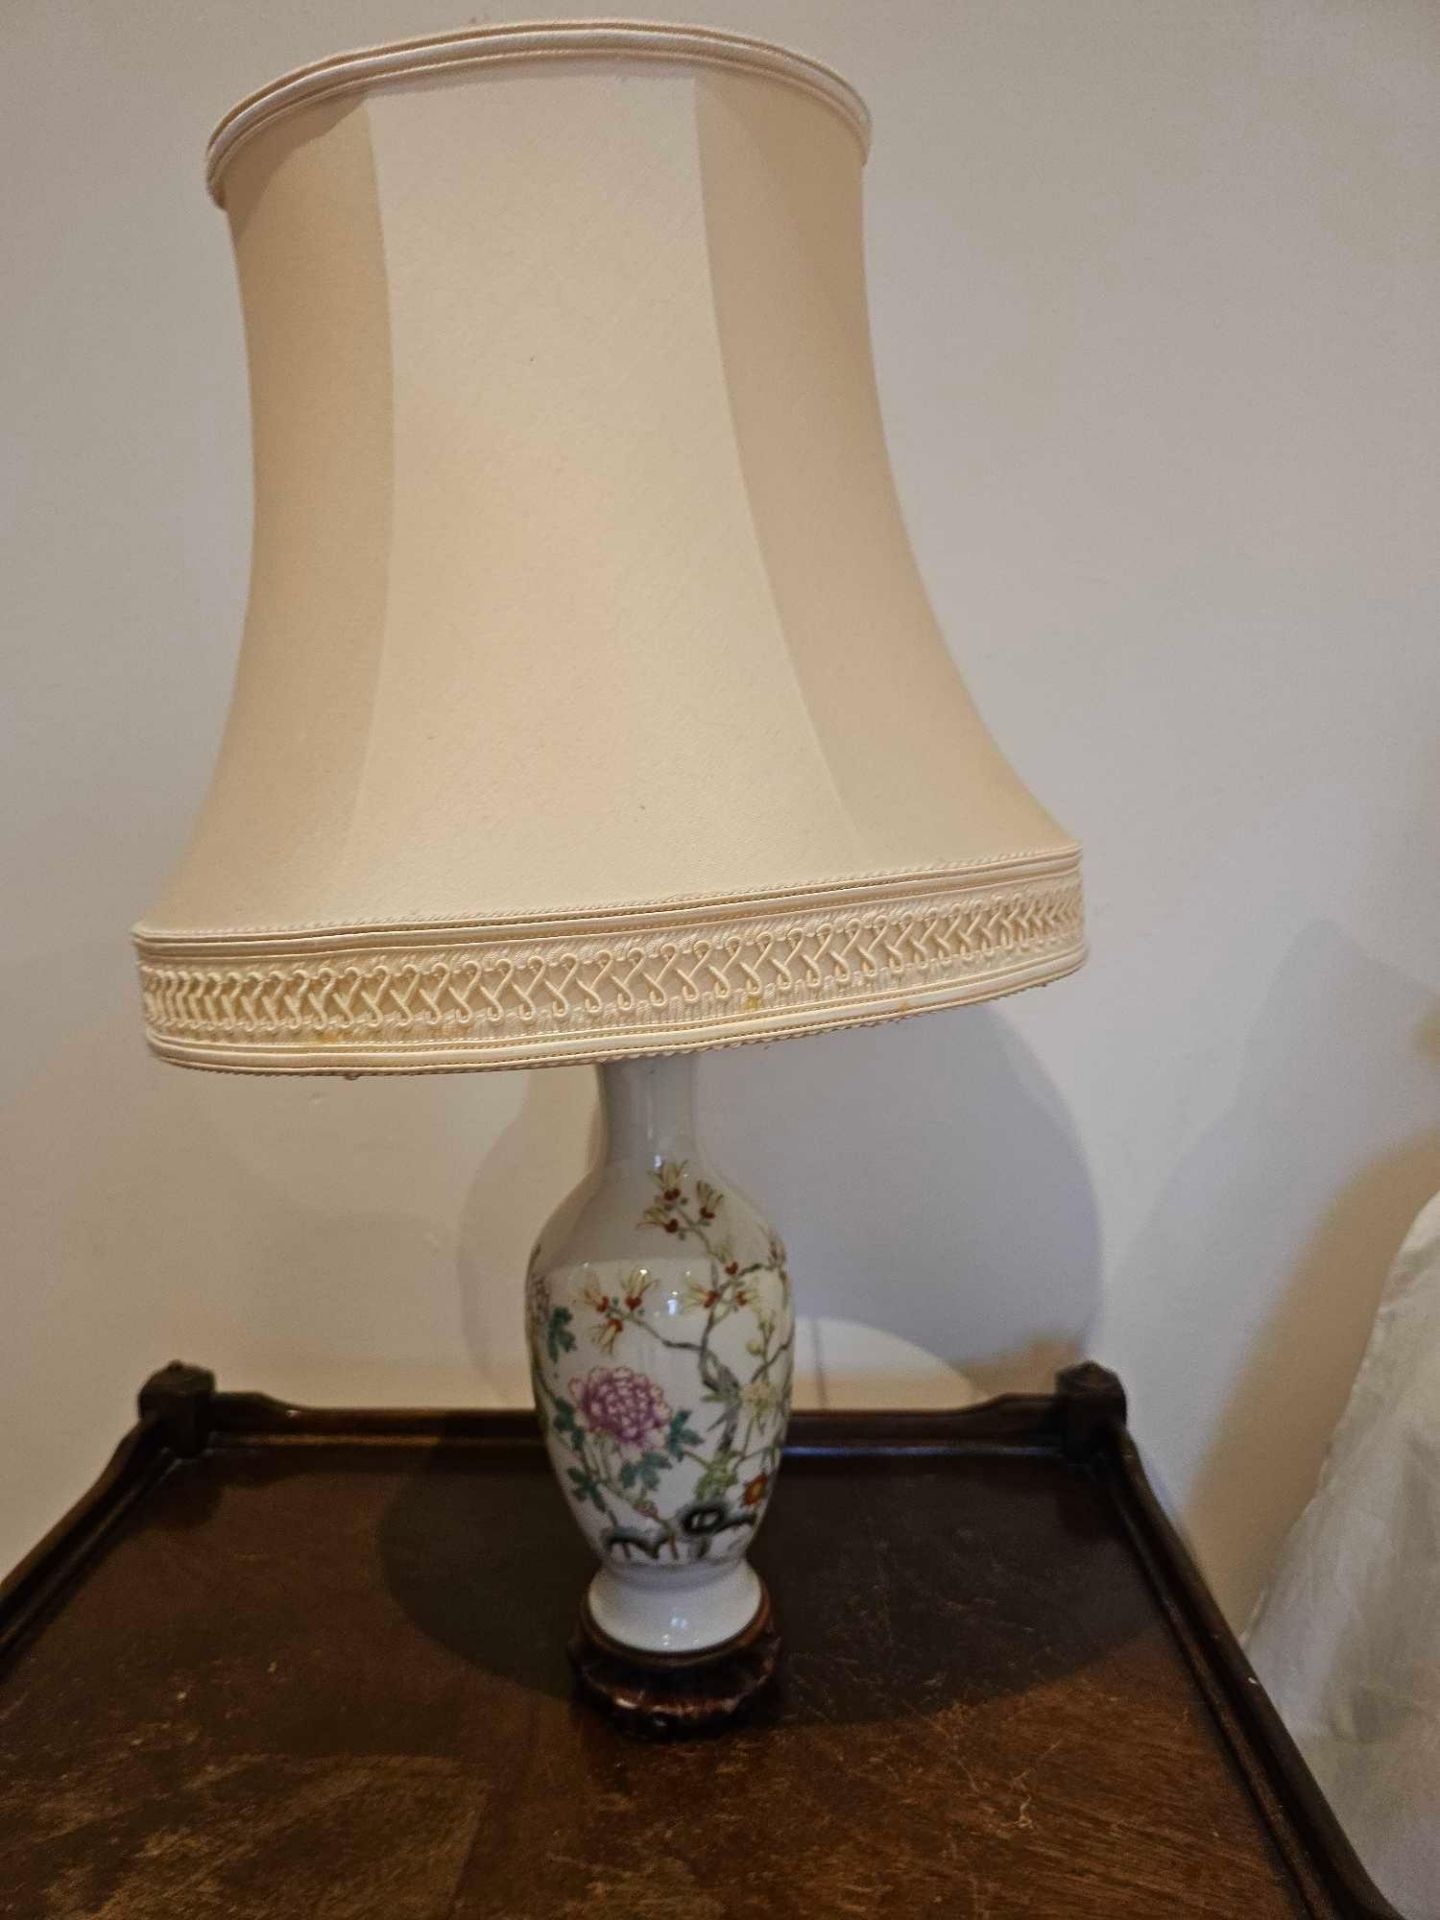 A Pair Of Porcelain Floral Pattern Table Lamps With Shade 60cm - Image 2 of 2